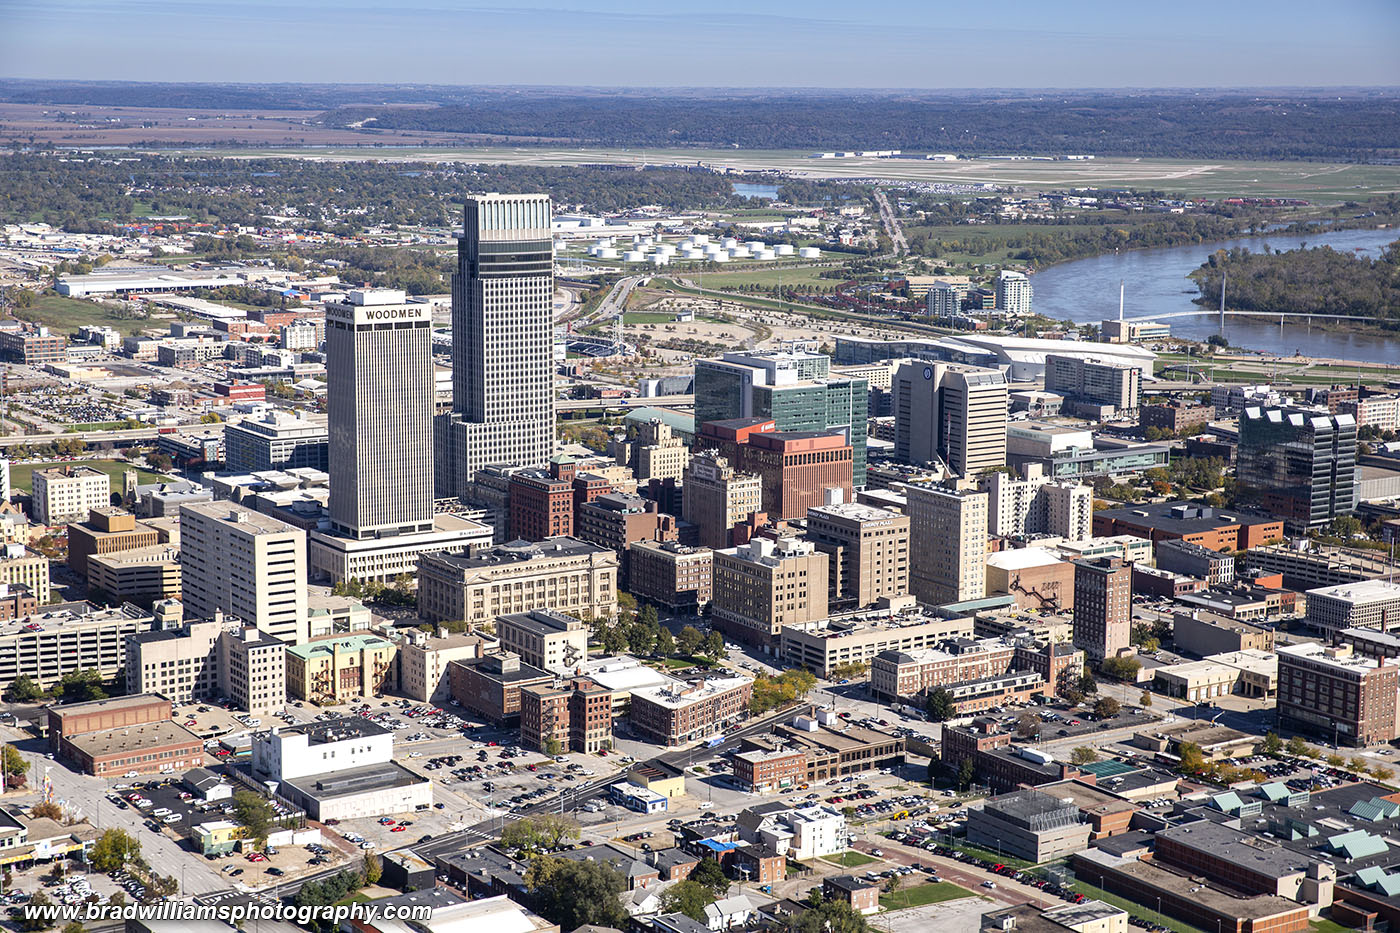 Aerial photo of Omaha, Nebraska photographed from helicopter in 2018.